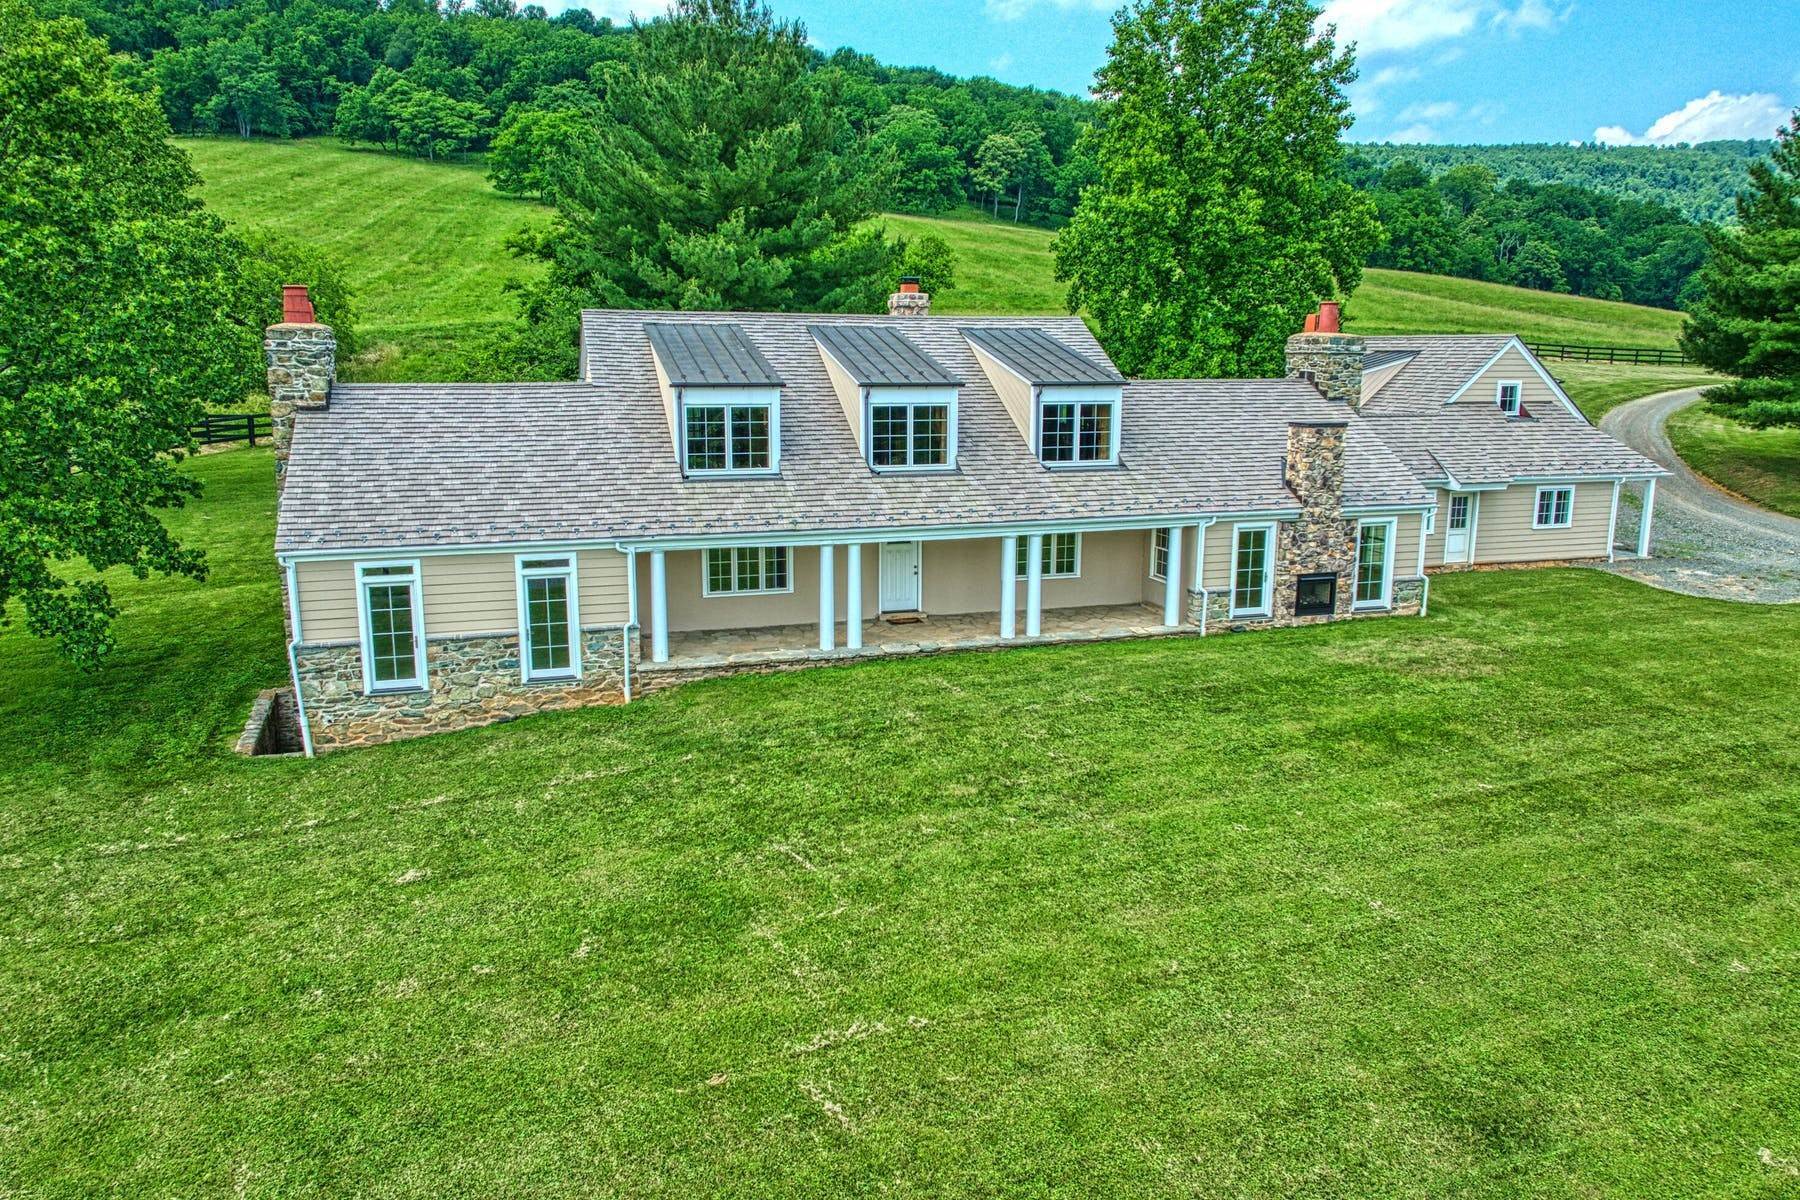 40. Farm and Ranch Properties at 21515 Trappe Road Upperville, Virginia 20184 United States